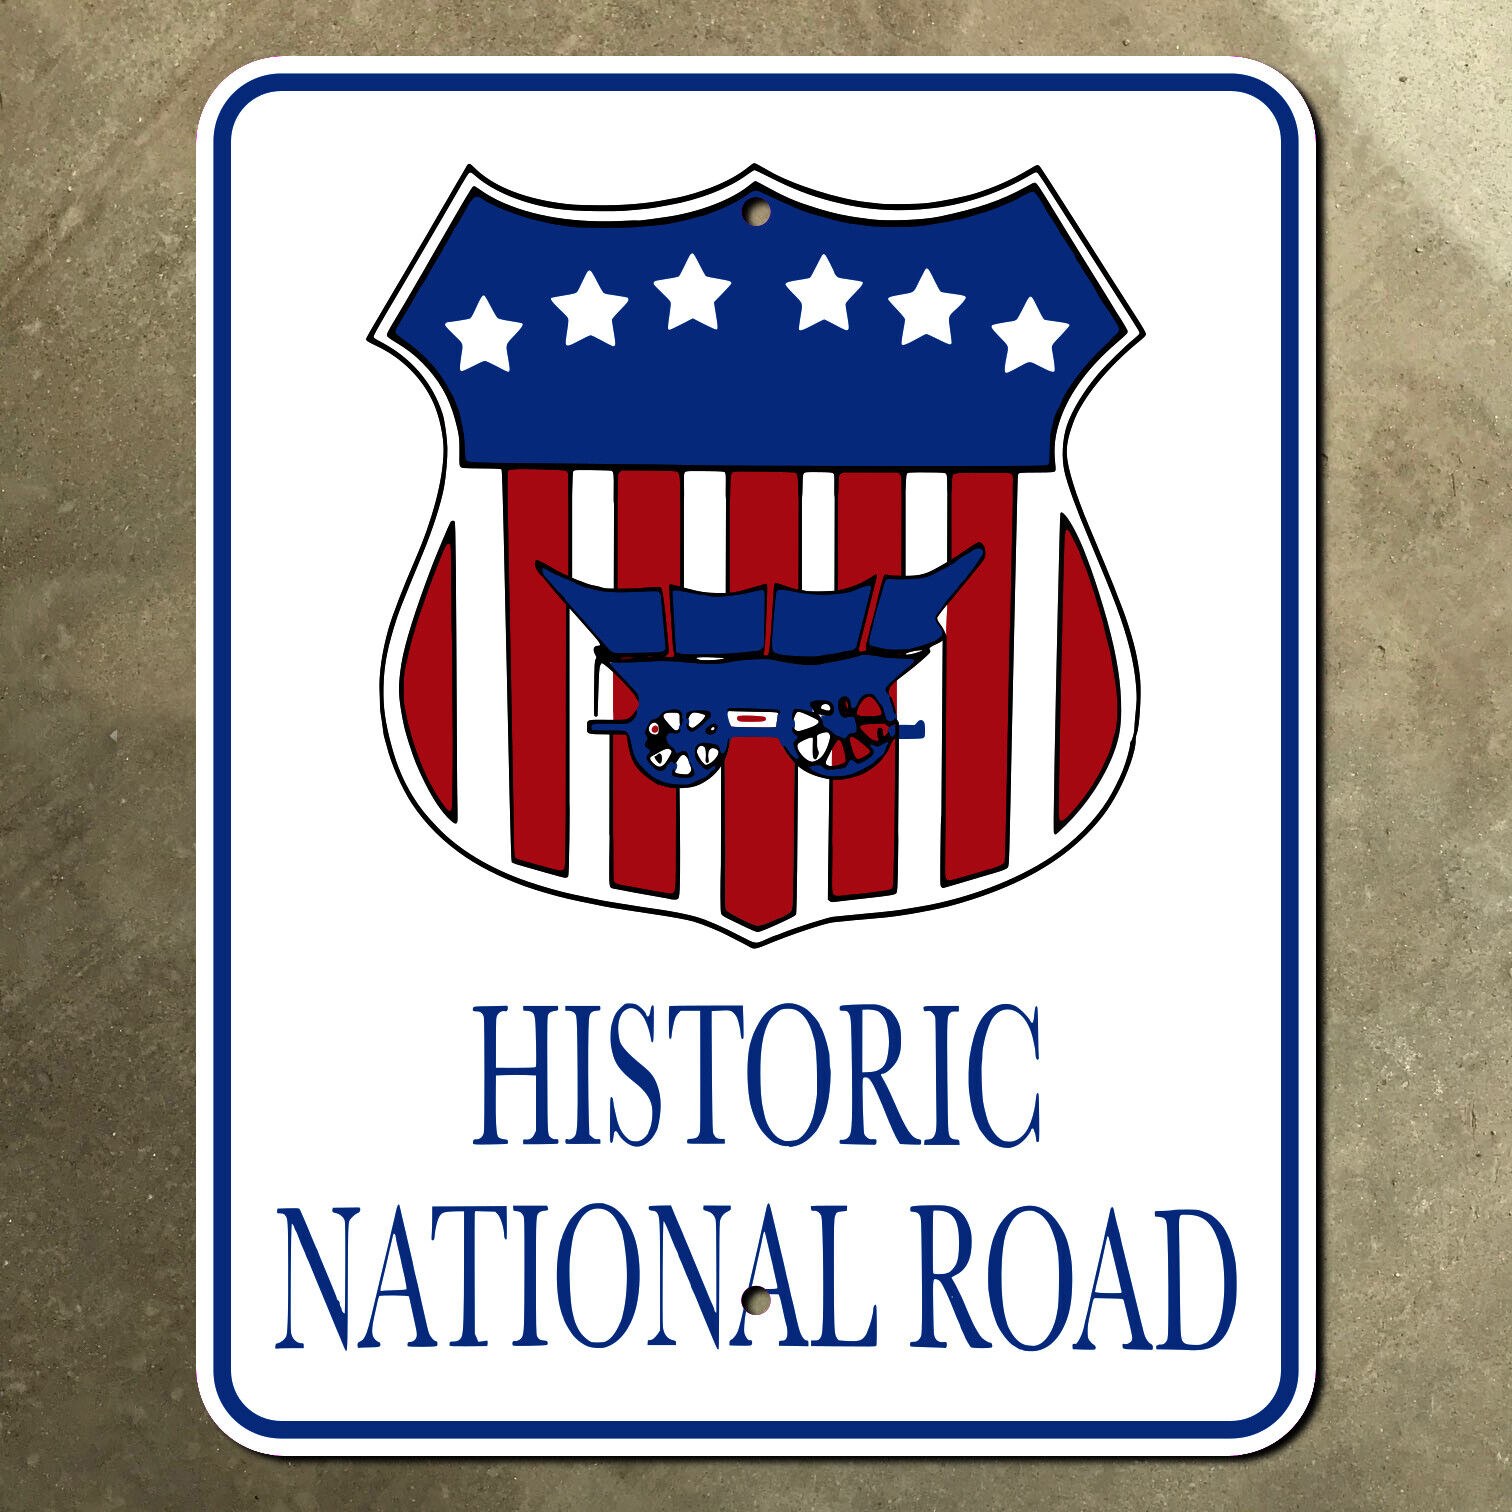 Illinois Historic National Road highway sign US route 40 Conestoga 16x20